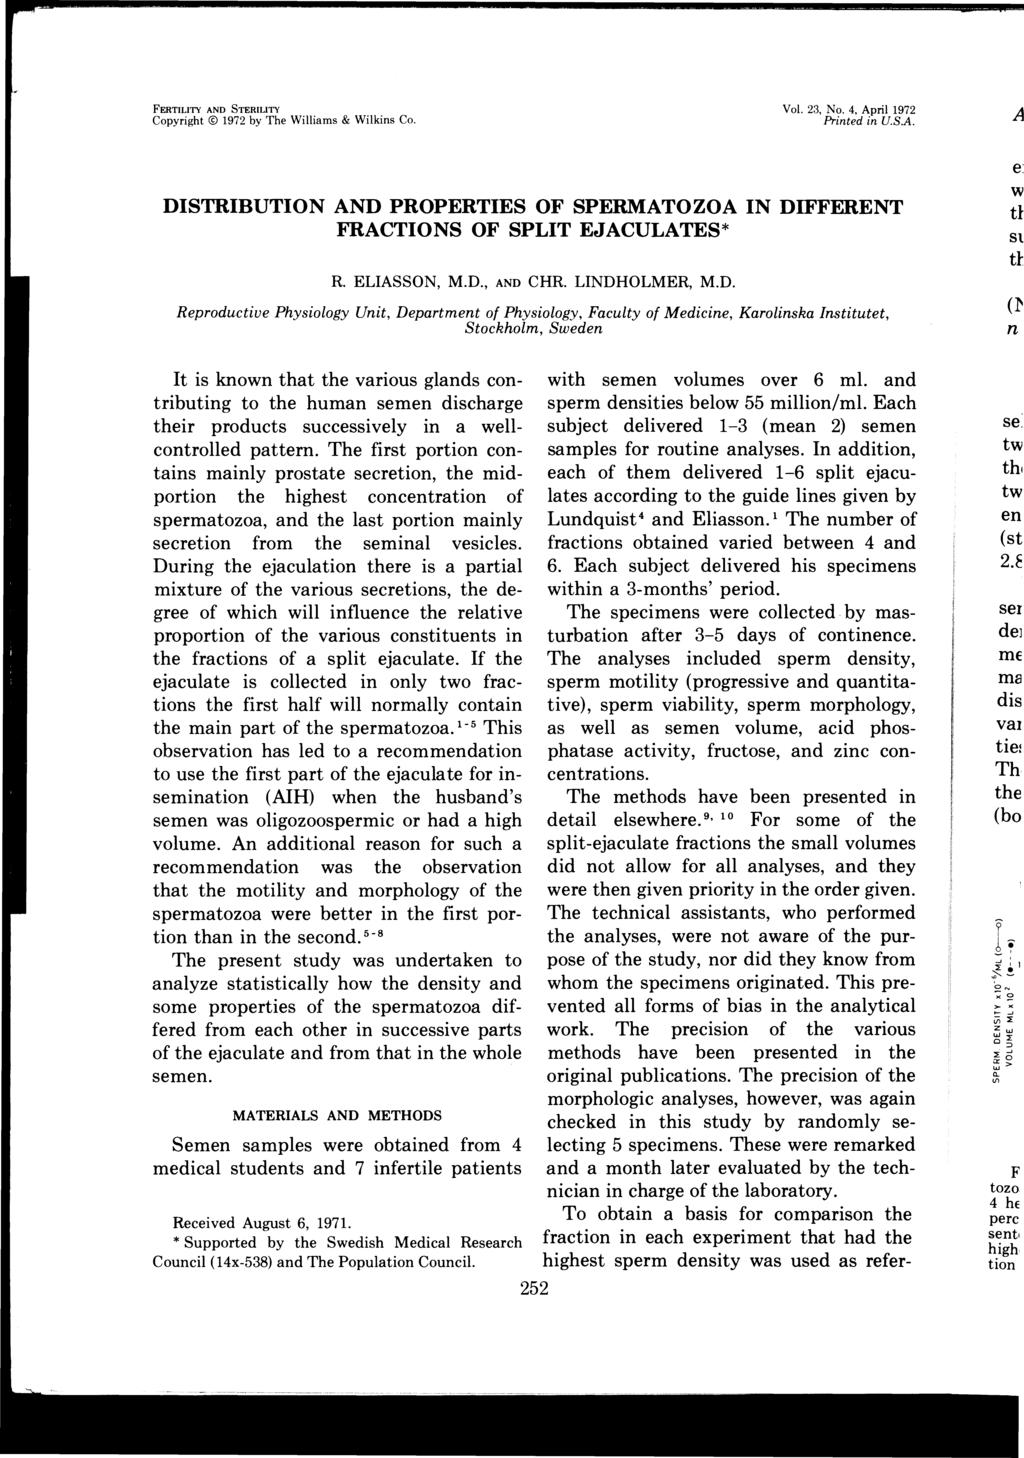 FERTILITY AND STERILITY Copyright 1972 by The Williams & Wilkis Co. Vol. 23, No.4, April 1972 Prited i U.S.A. DISTRIBUTION AND PROPERTIES OF SPERMATOZOA IN DIFFERENT FRACTIONS OF SPLIT EJACULATES* R.